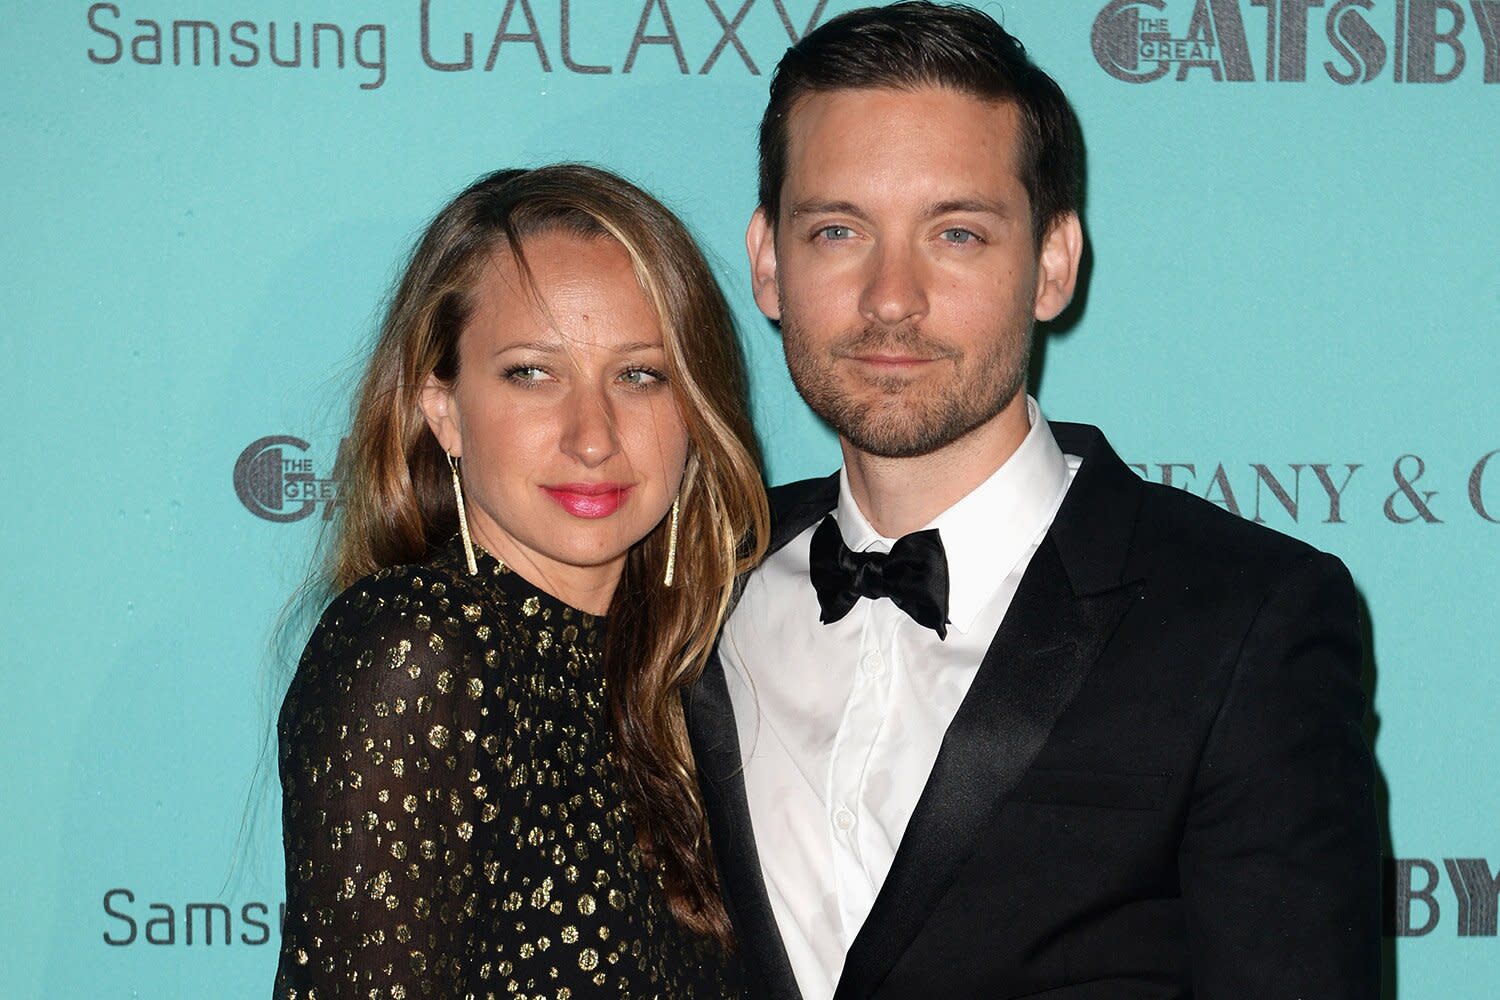 Jennifer Meyer Files for Divorce from Tobey Maguire 4 Years After Split - Yahoo! Voices